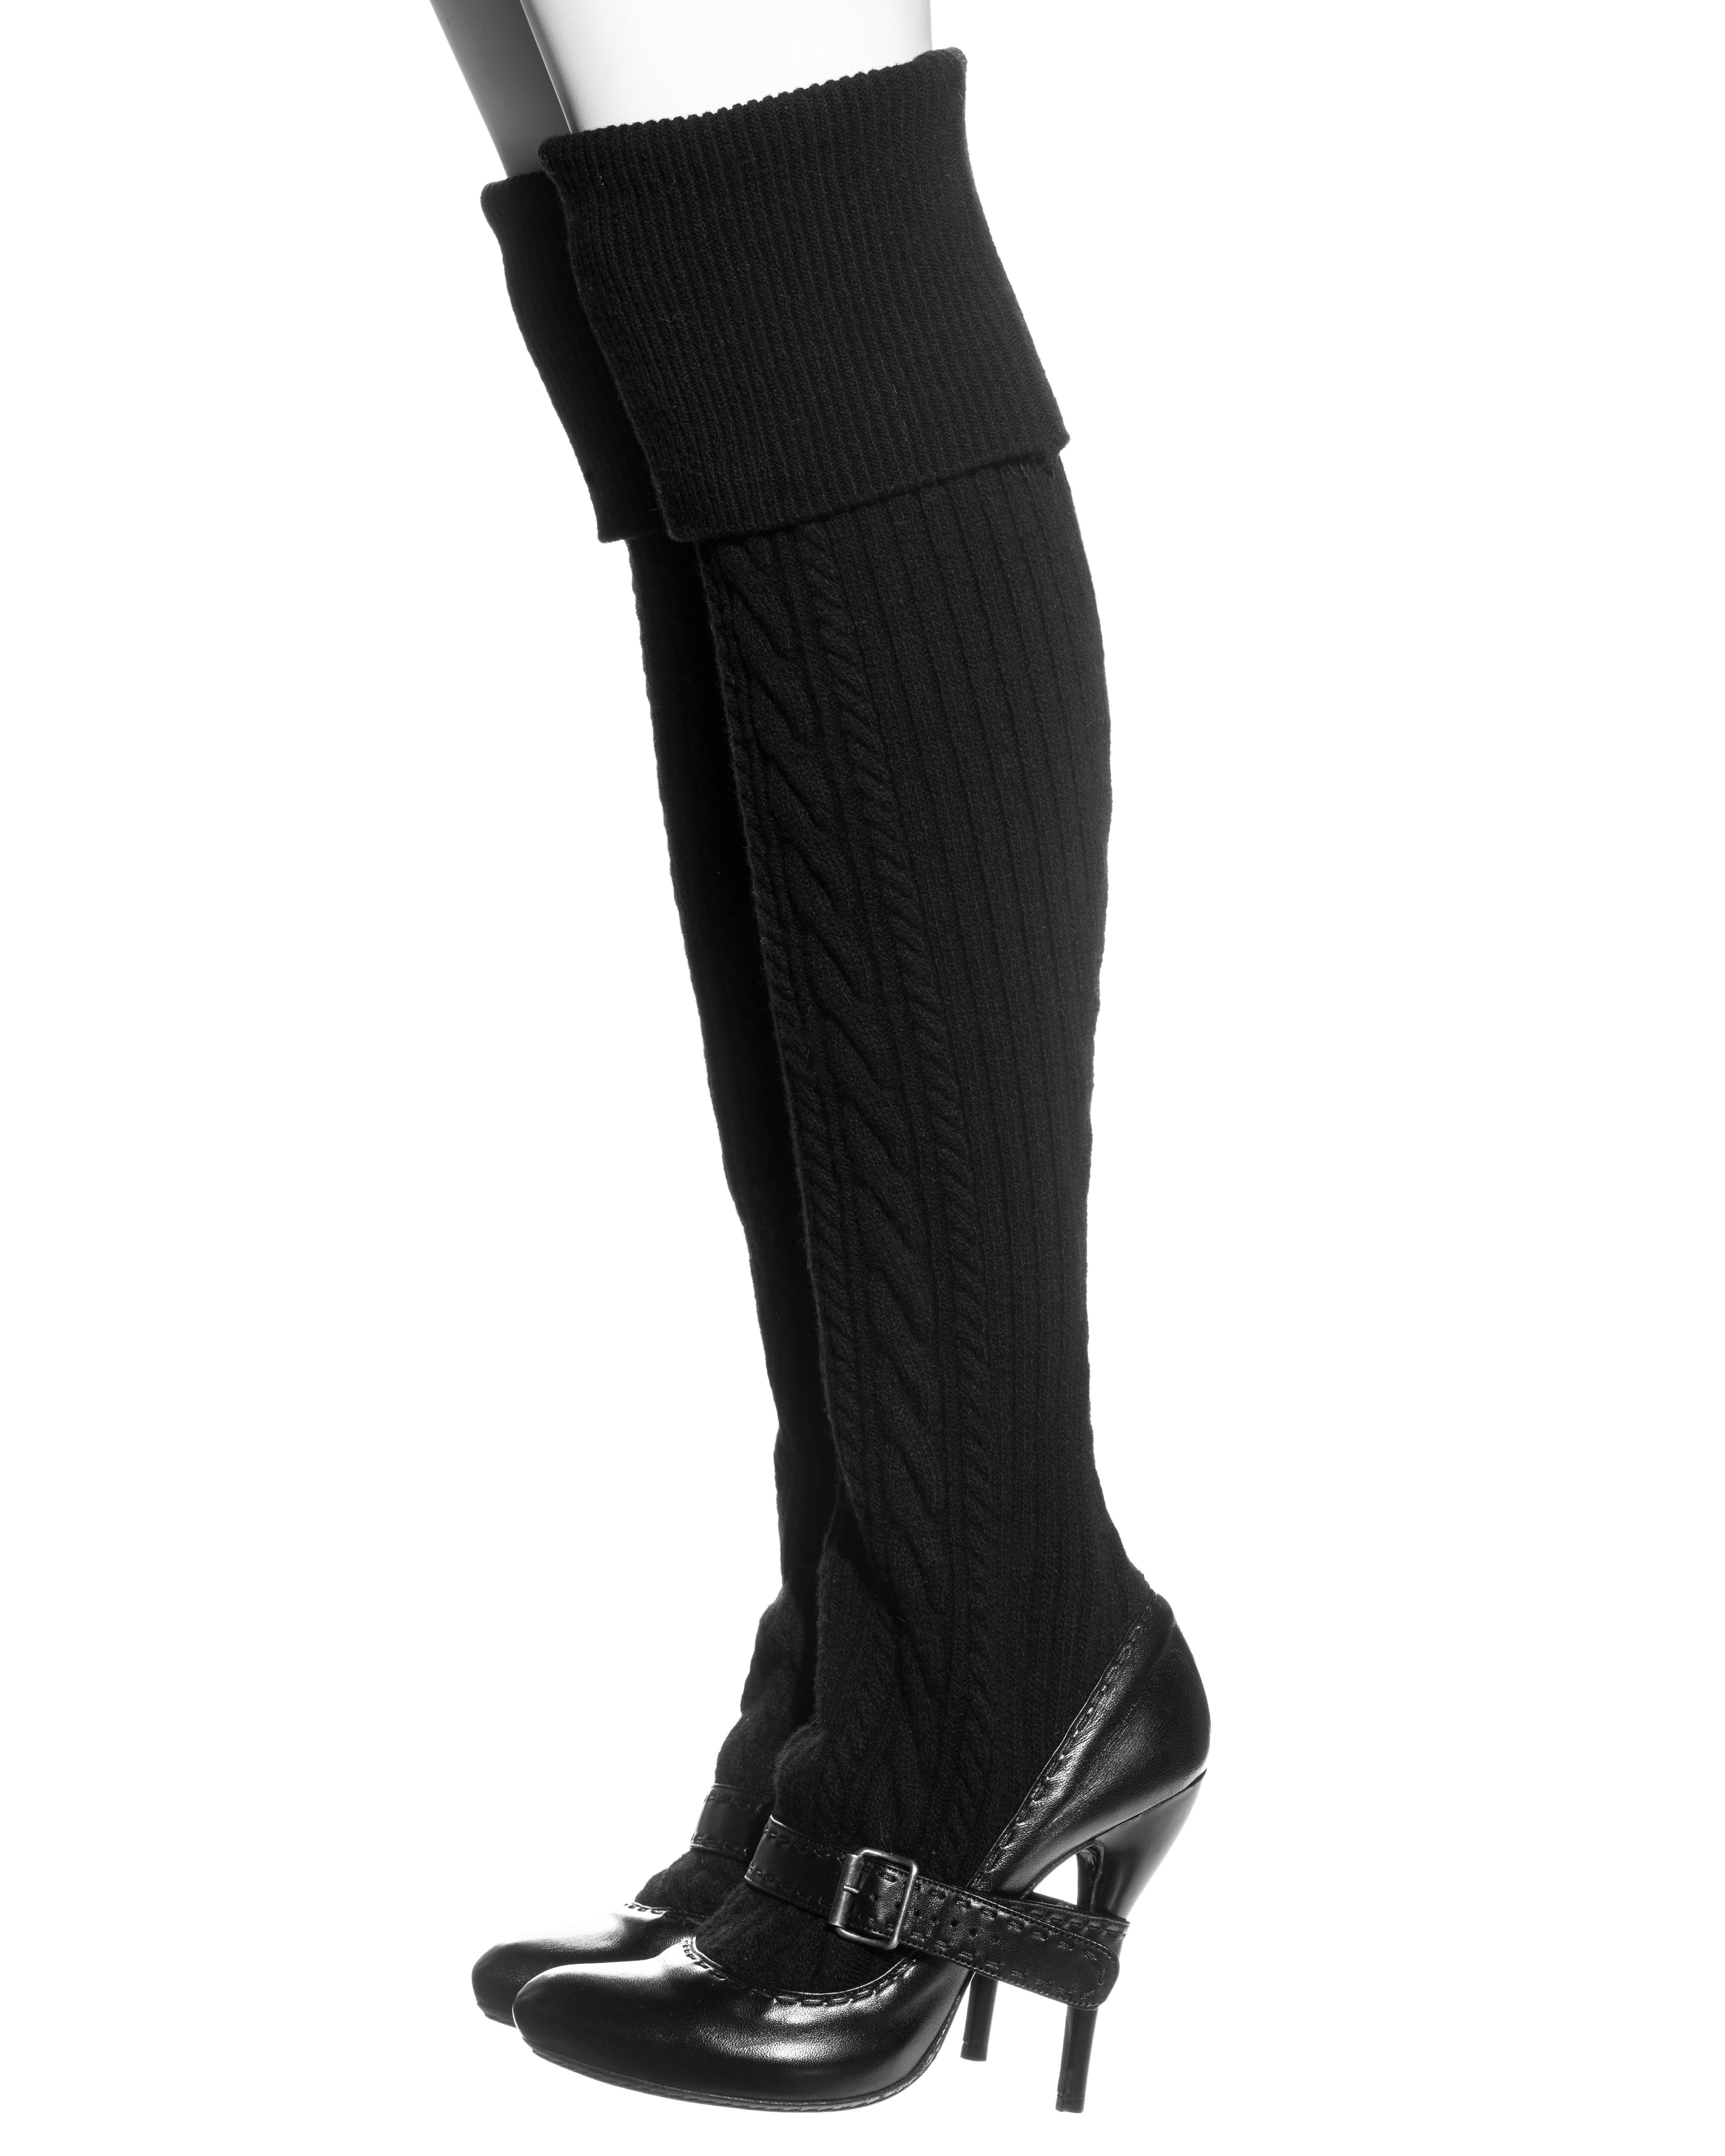 Alexander McQueen black leather thigh-high sock boots, fw 2006